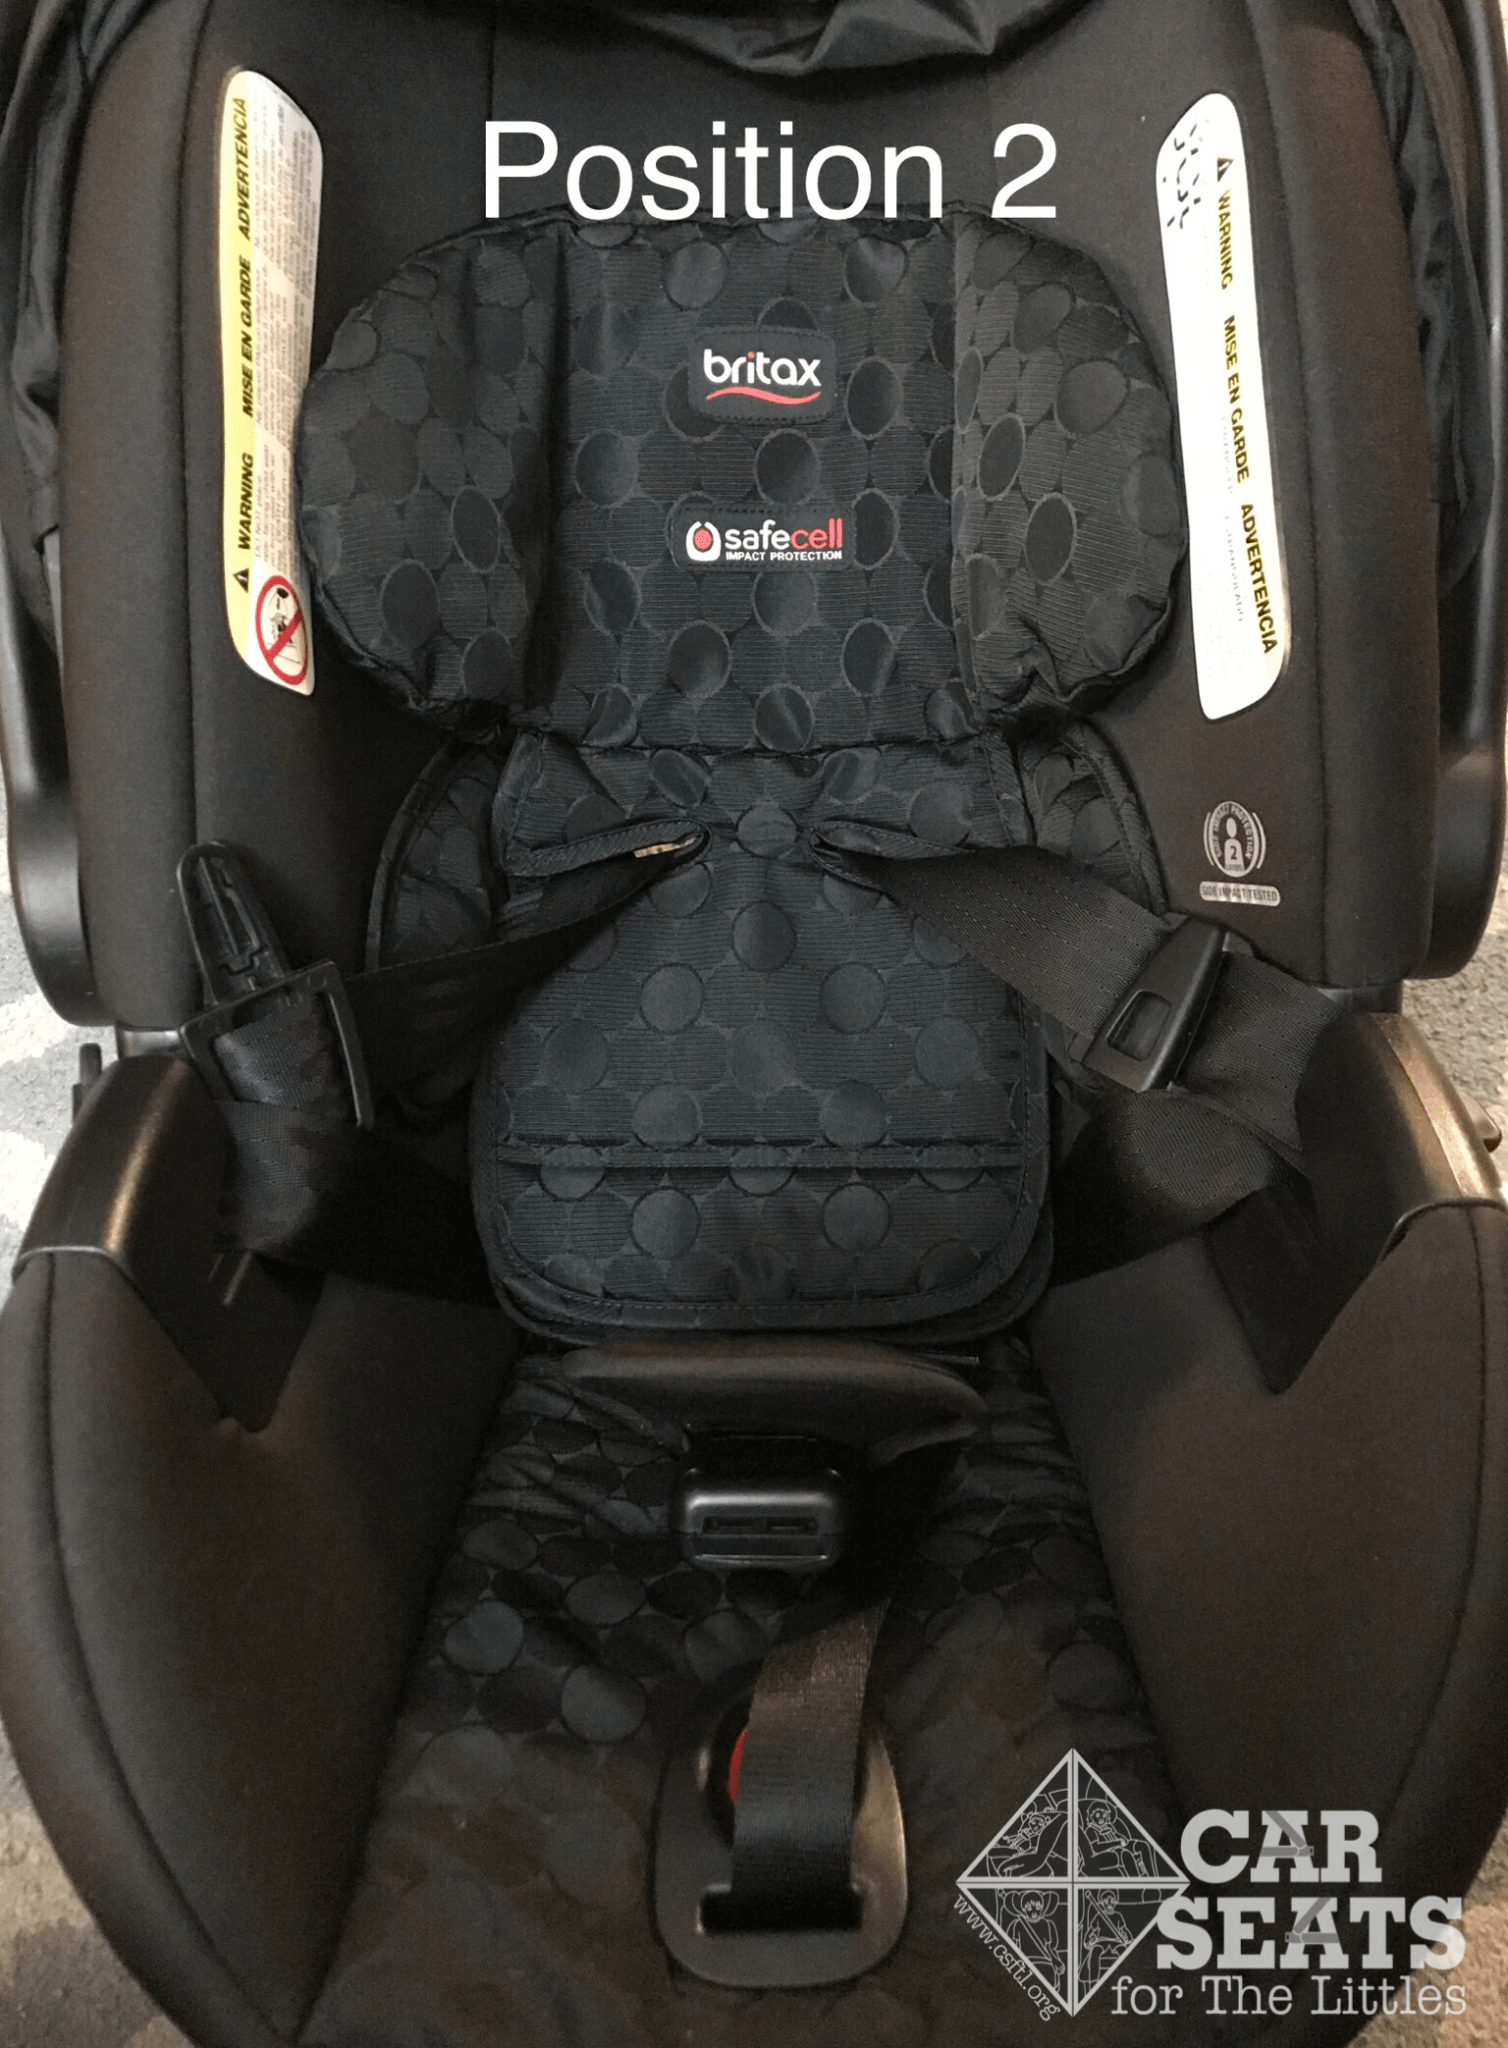 Britax Endeavours Review Car Seats, When To Take Newborn Insert Out Of Britax Car Seat